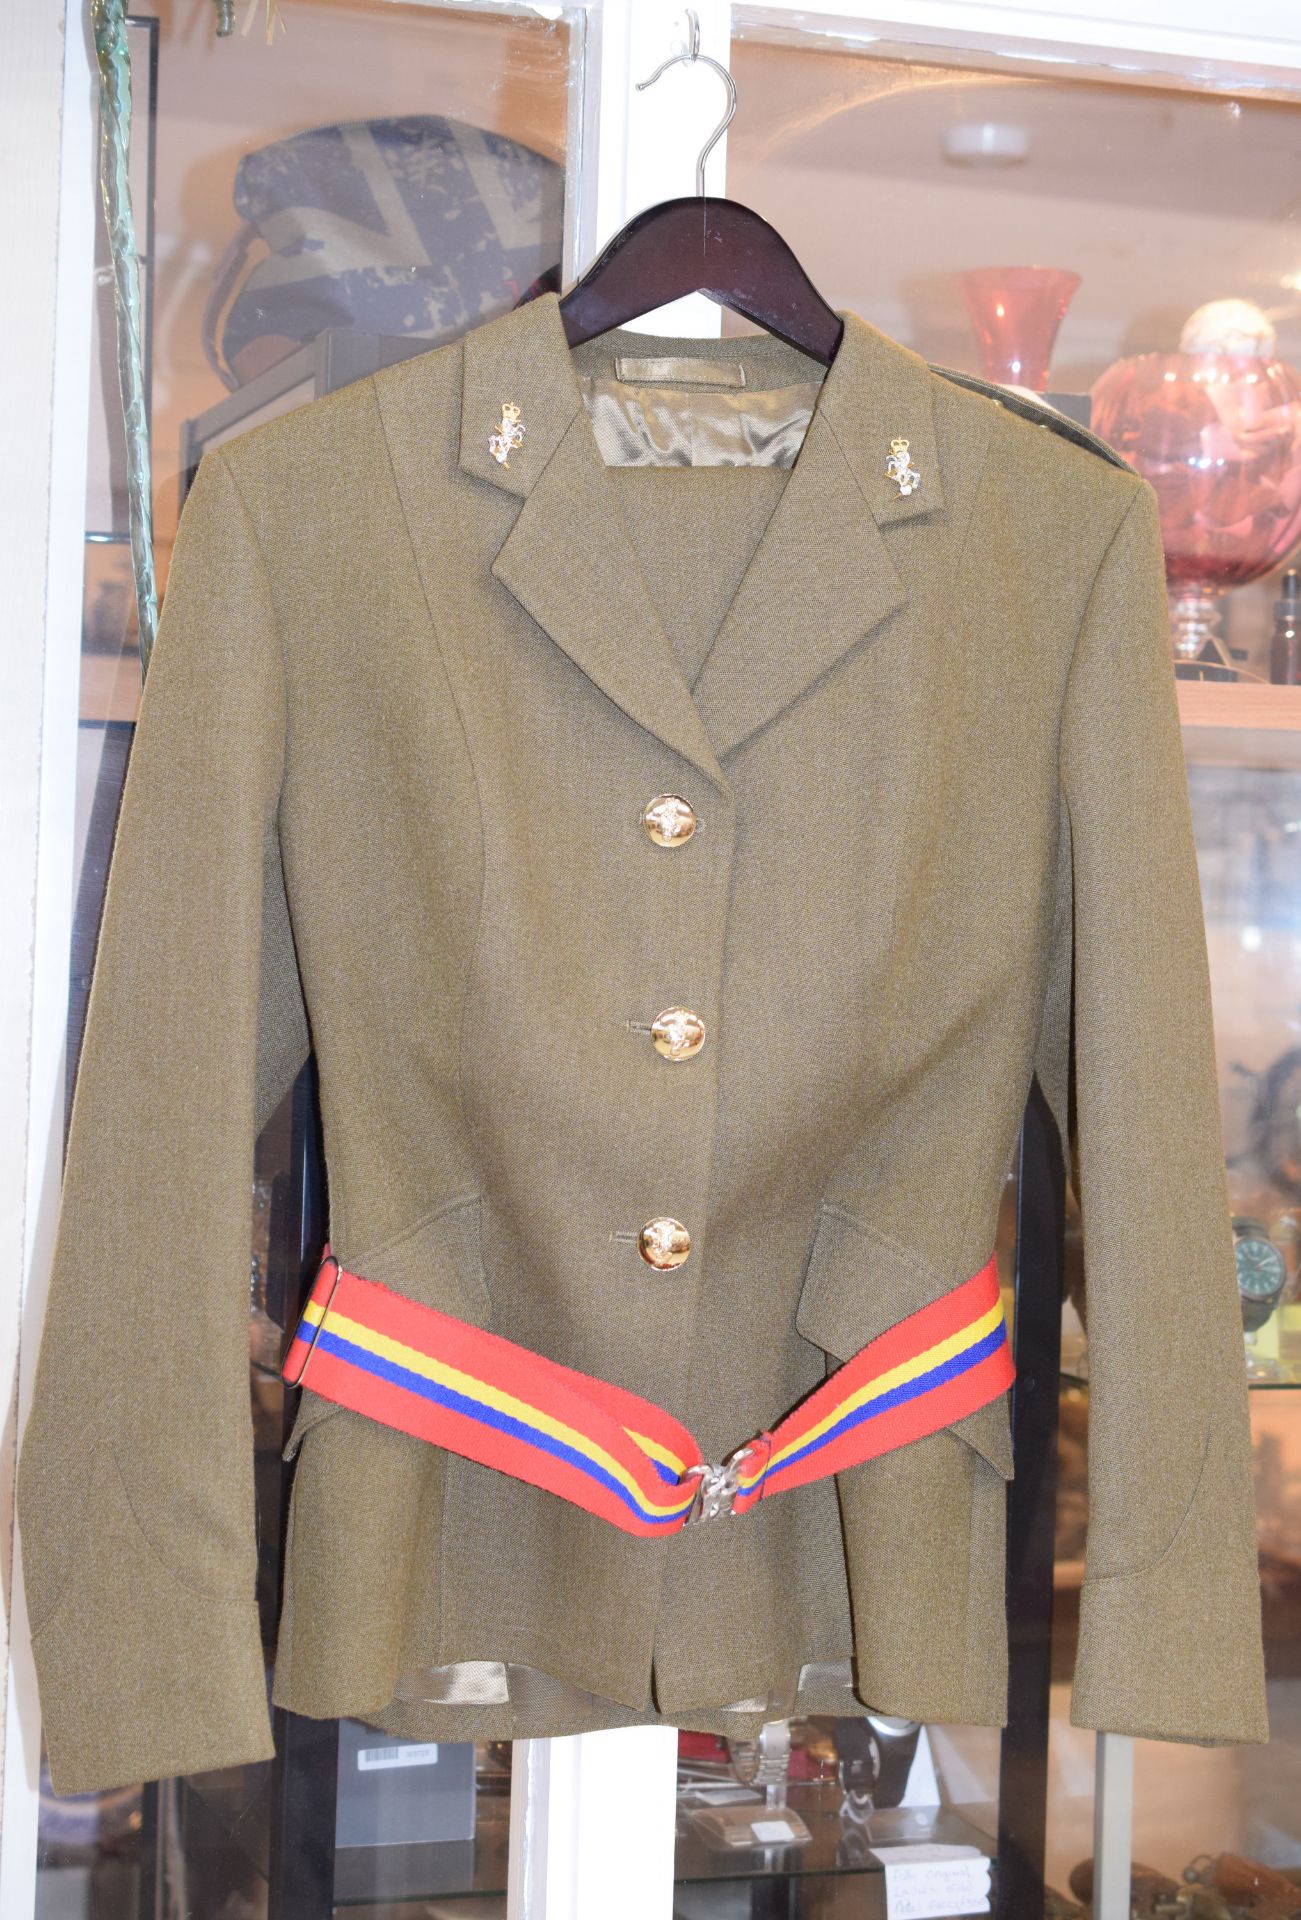 Female Army Officers UniformWith Skirt And Belt